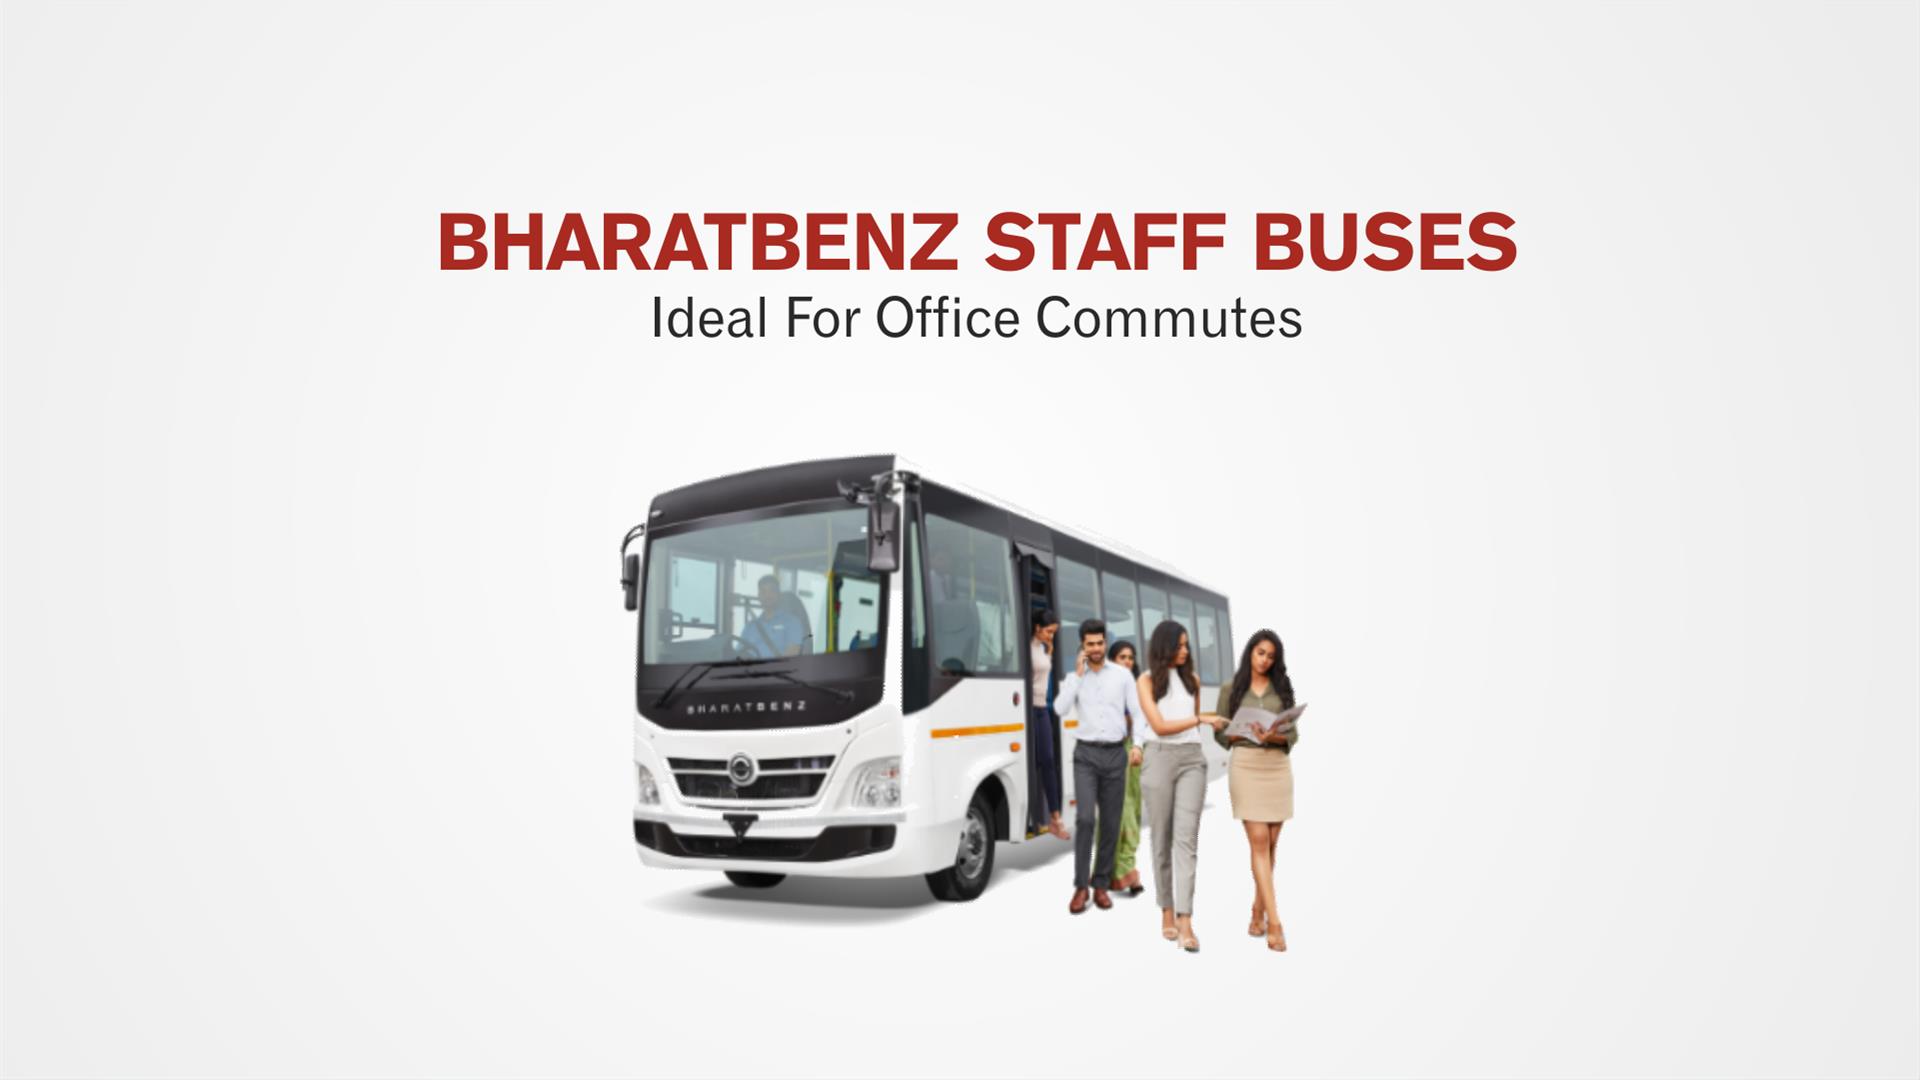 Top 5 Reasons That Make BharatBenz Staff Bus Ideal For Office Commutes